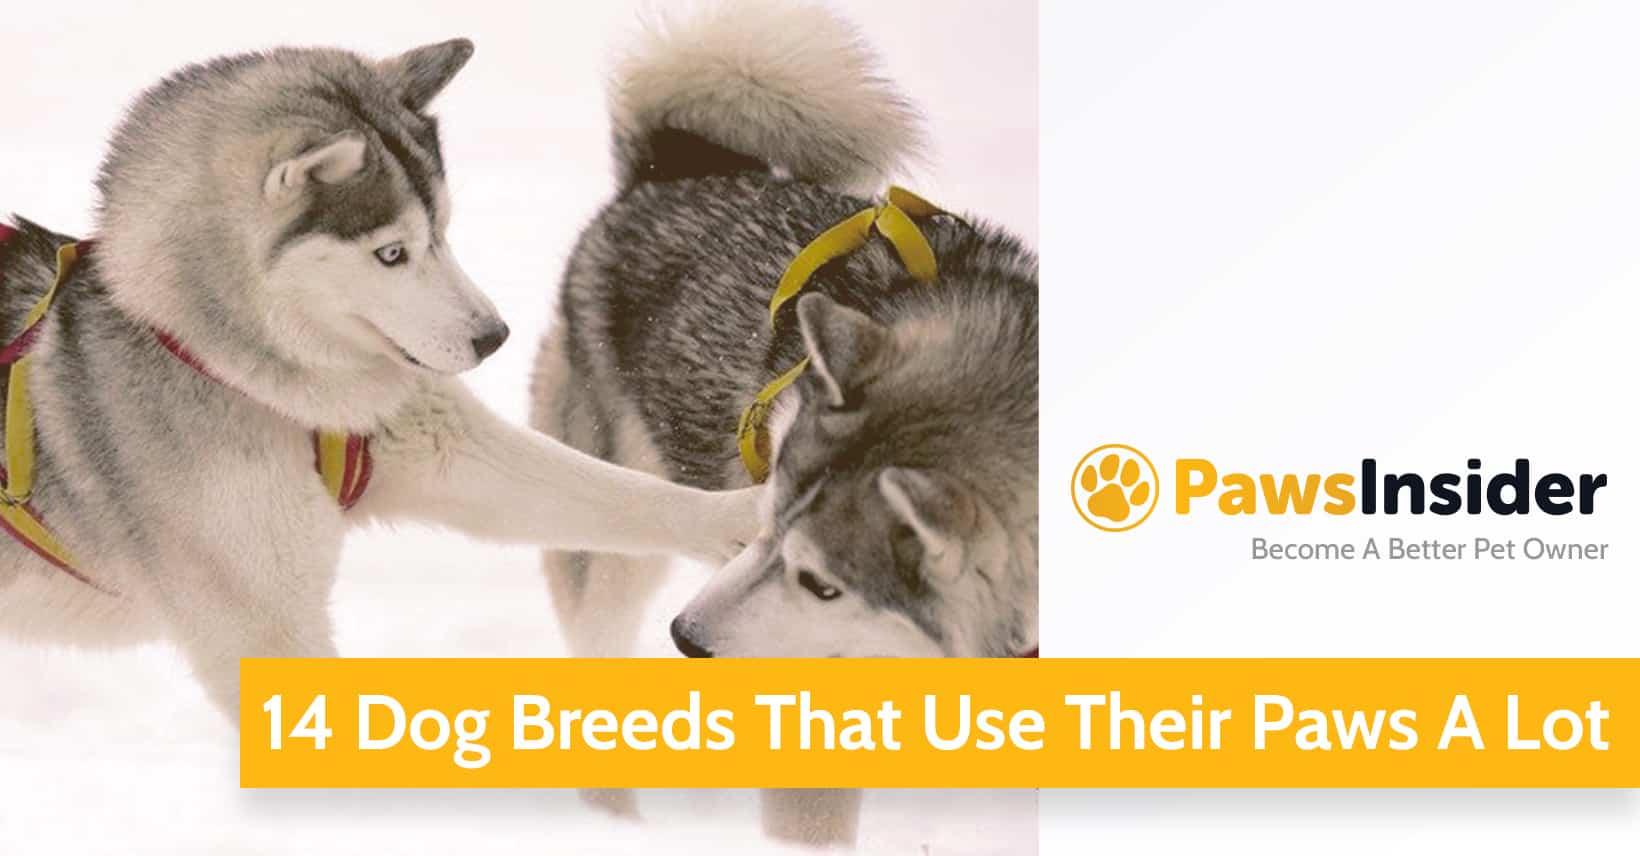 14 Dog Breeds That Use Their Paws A Lot